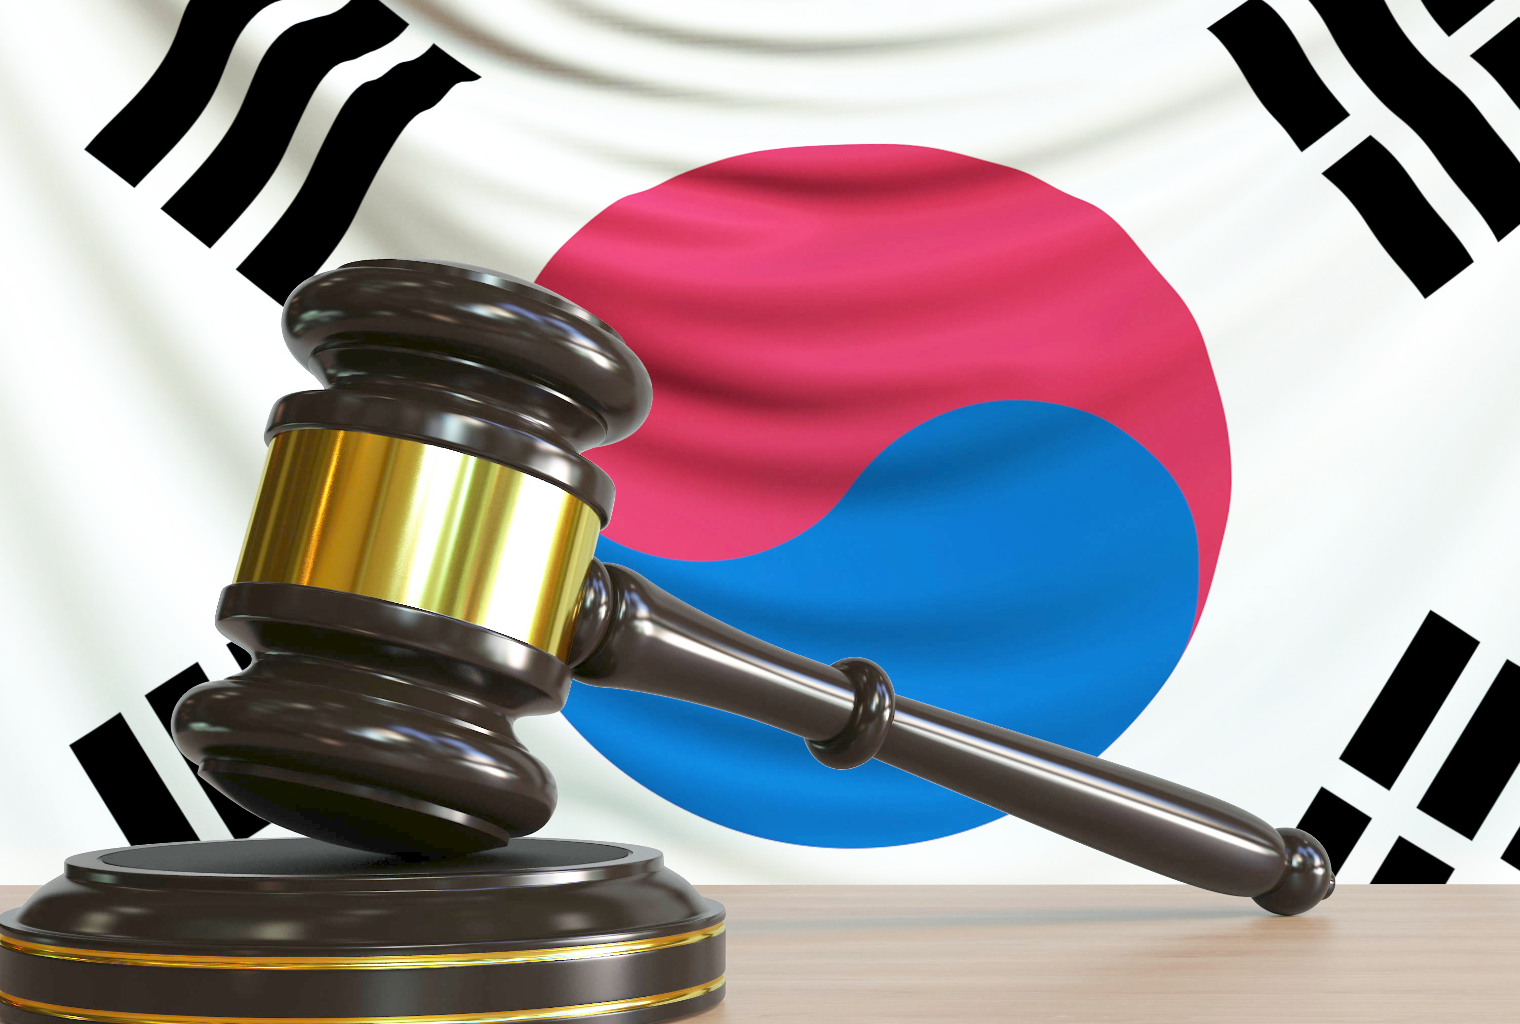 South Korean Exchange CEO Sentenced to 16 Years in Prison